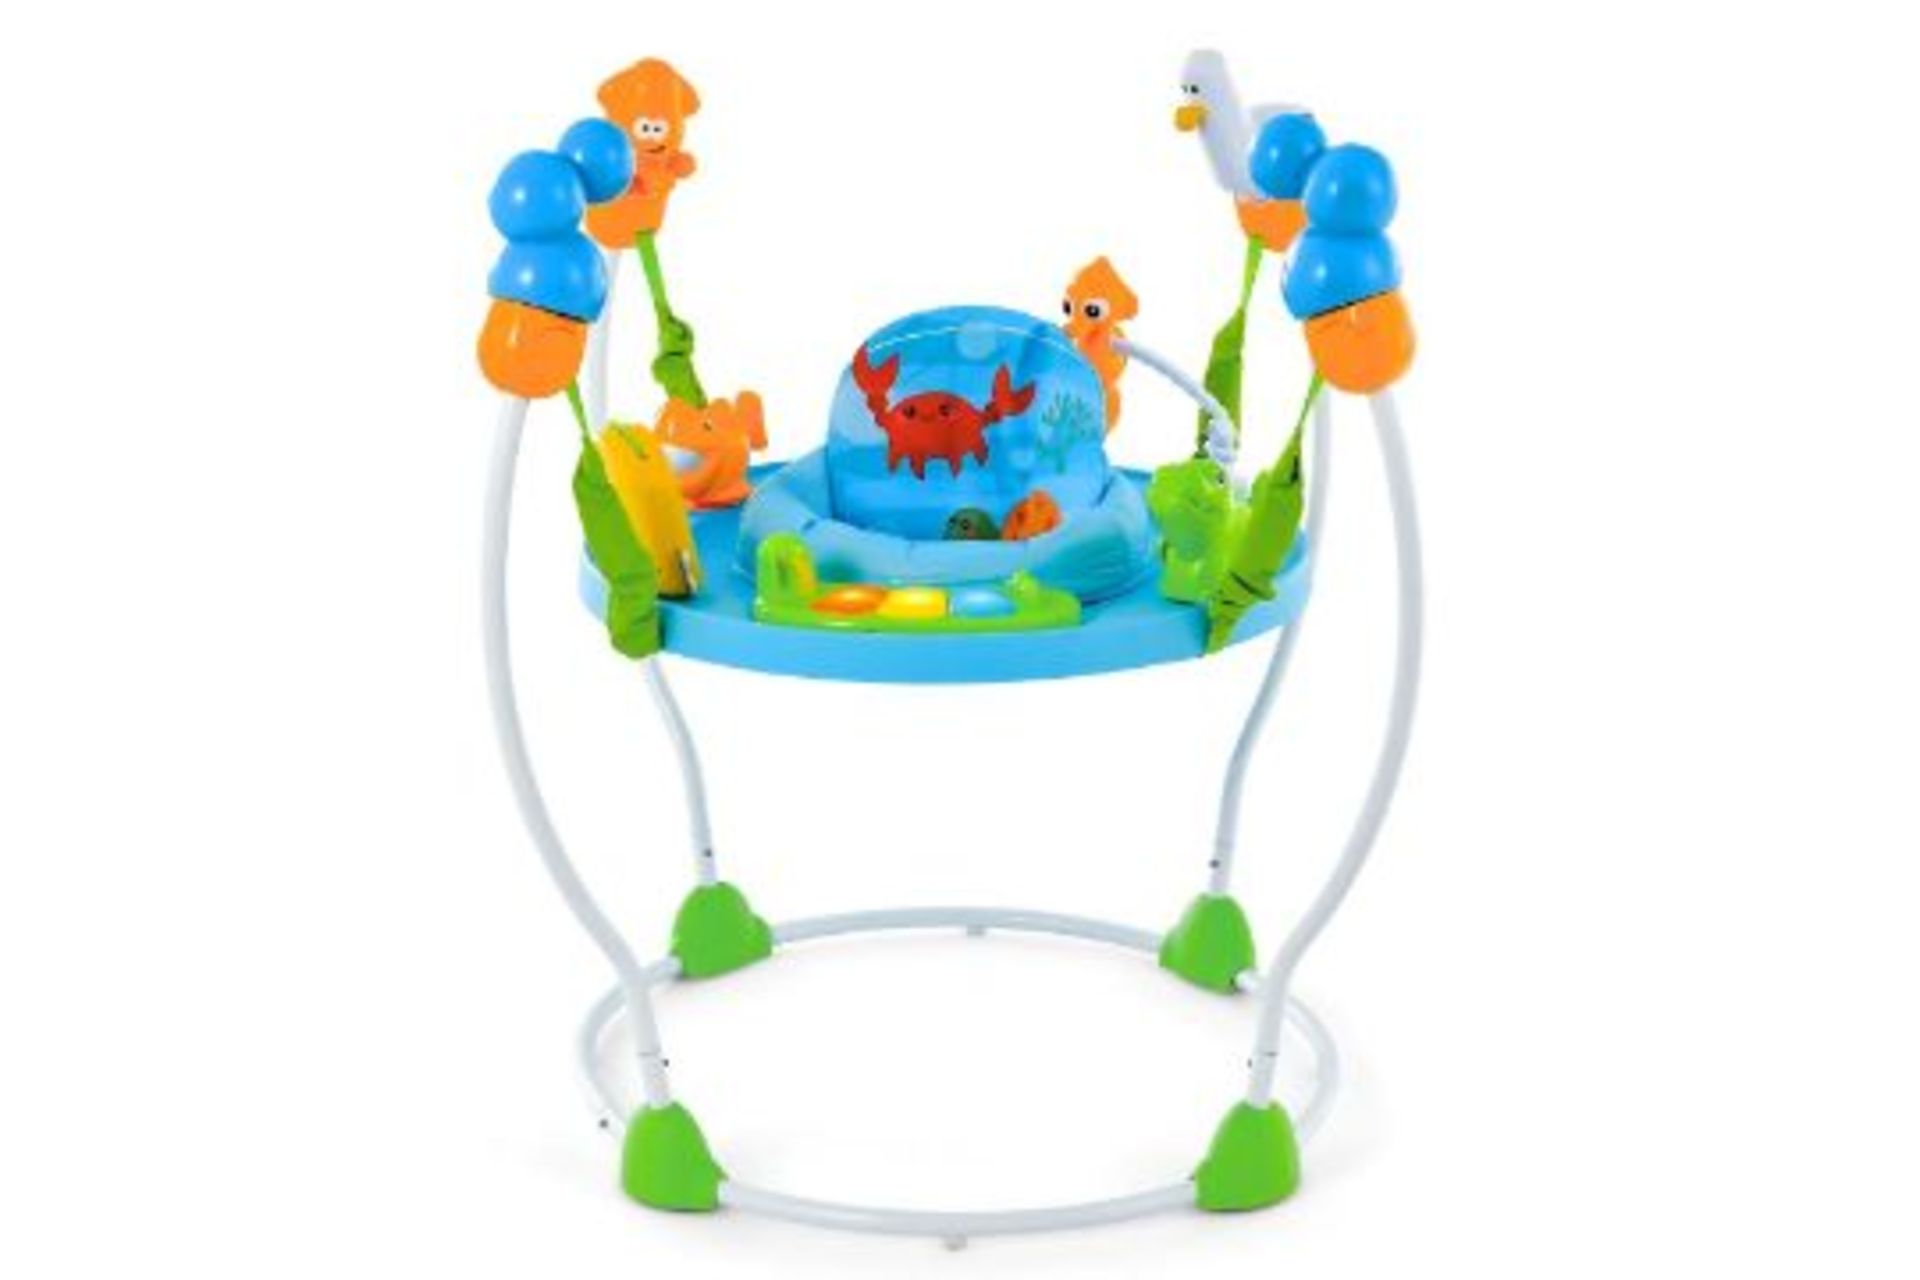 Underwater World Themed Baby Jumper with 5 Adjustable Heights and Removable Seat Cushion-Blue. -